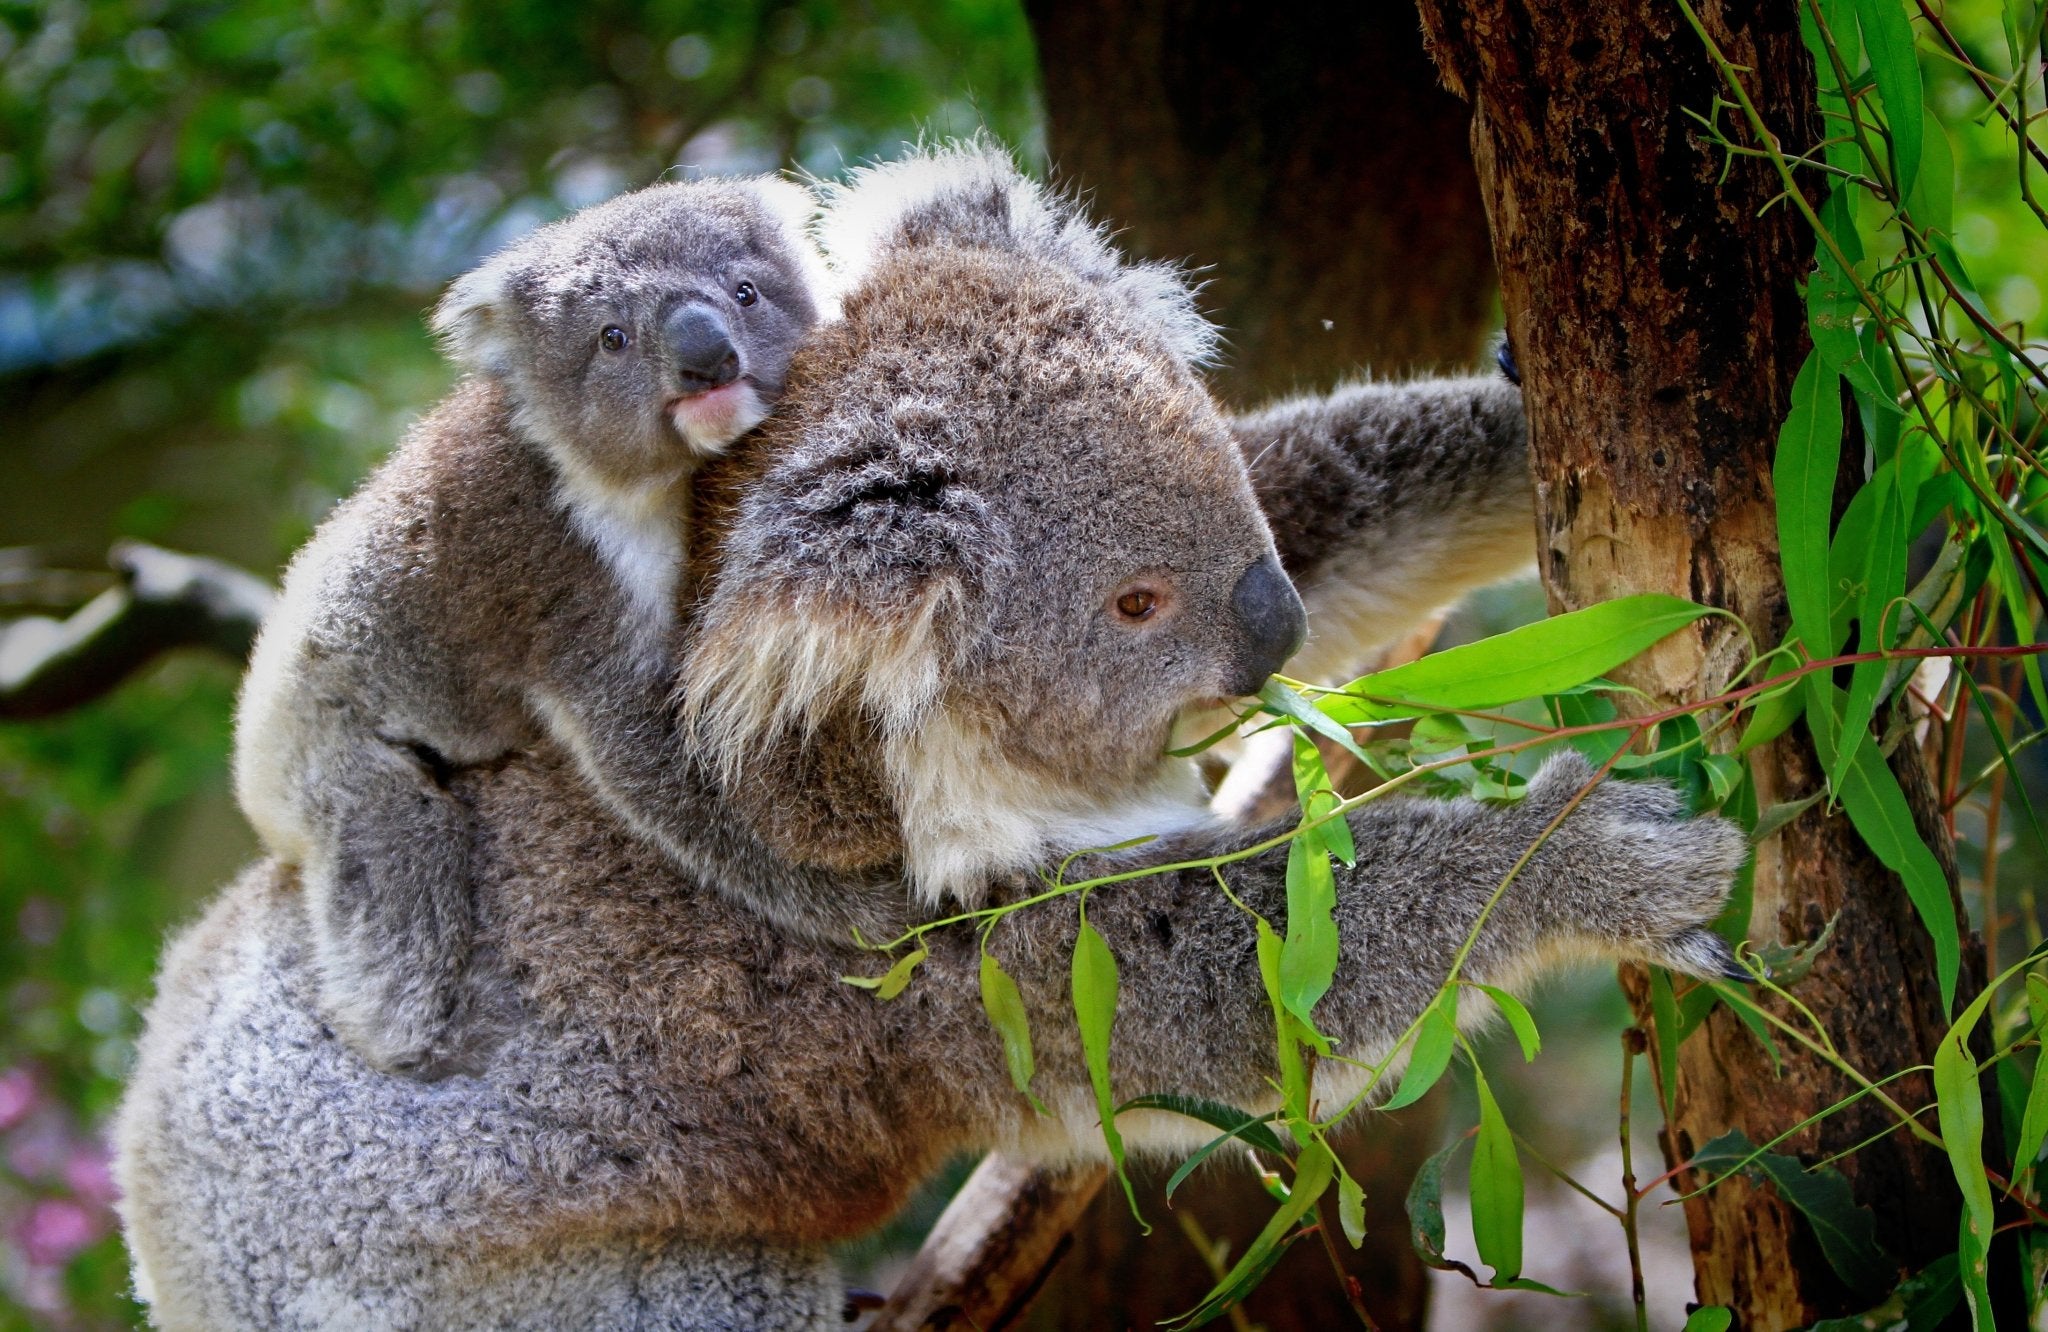 Koala bear with a baby on its back eating some plants